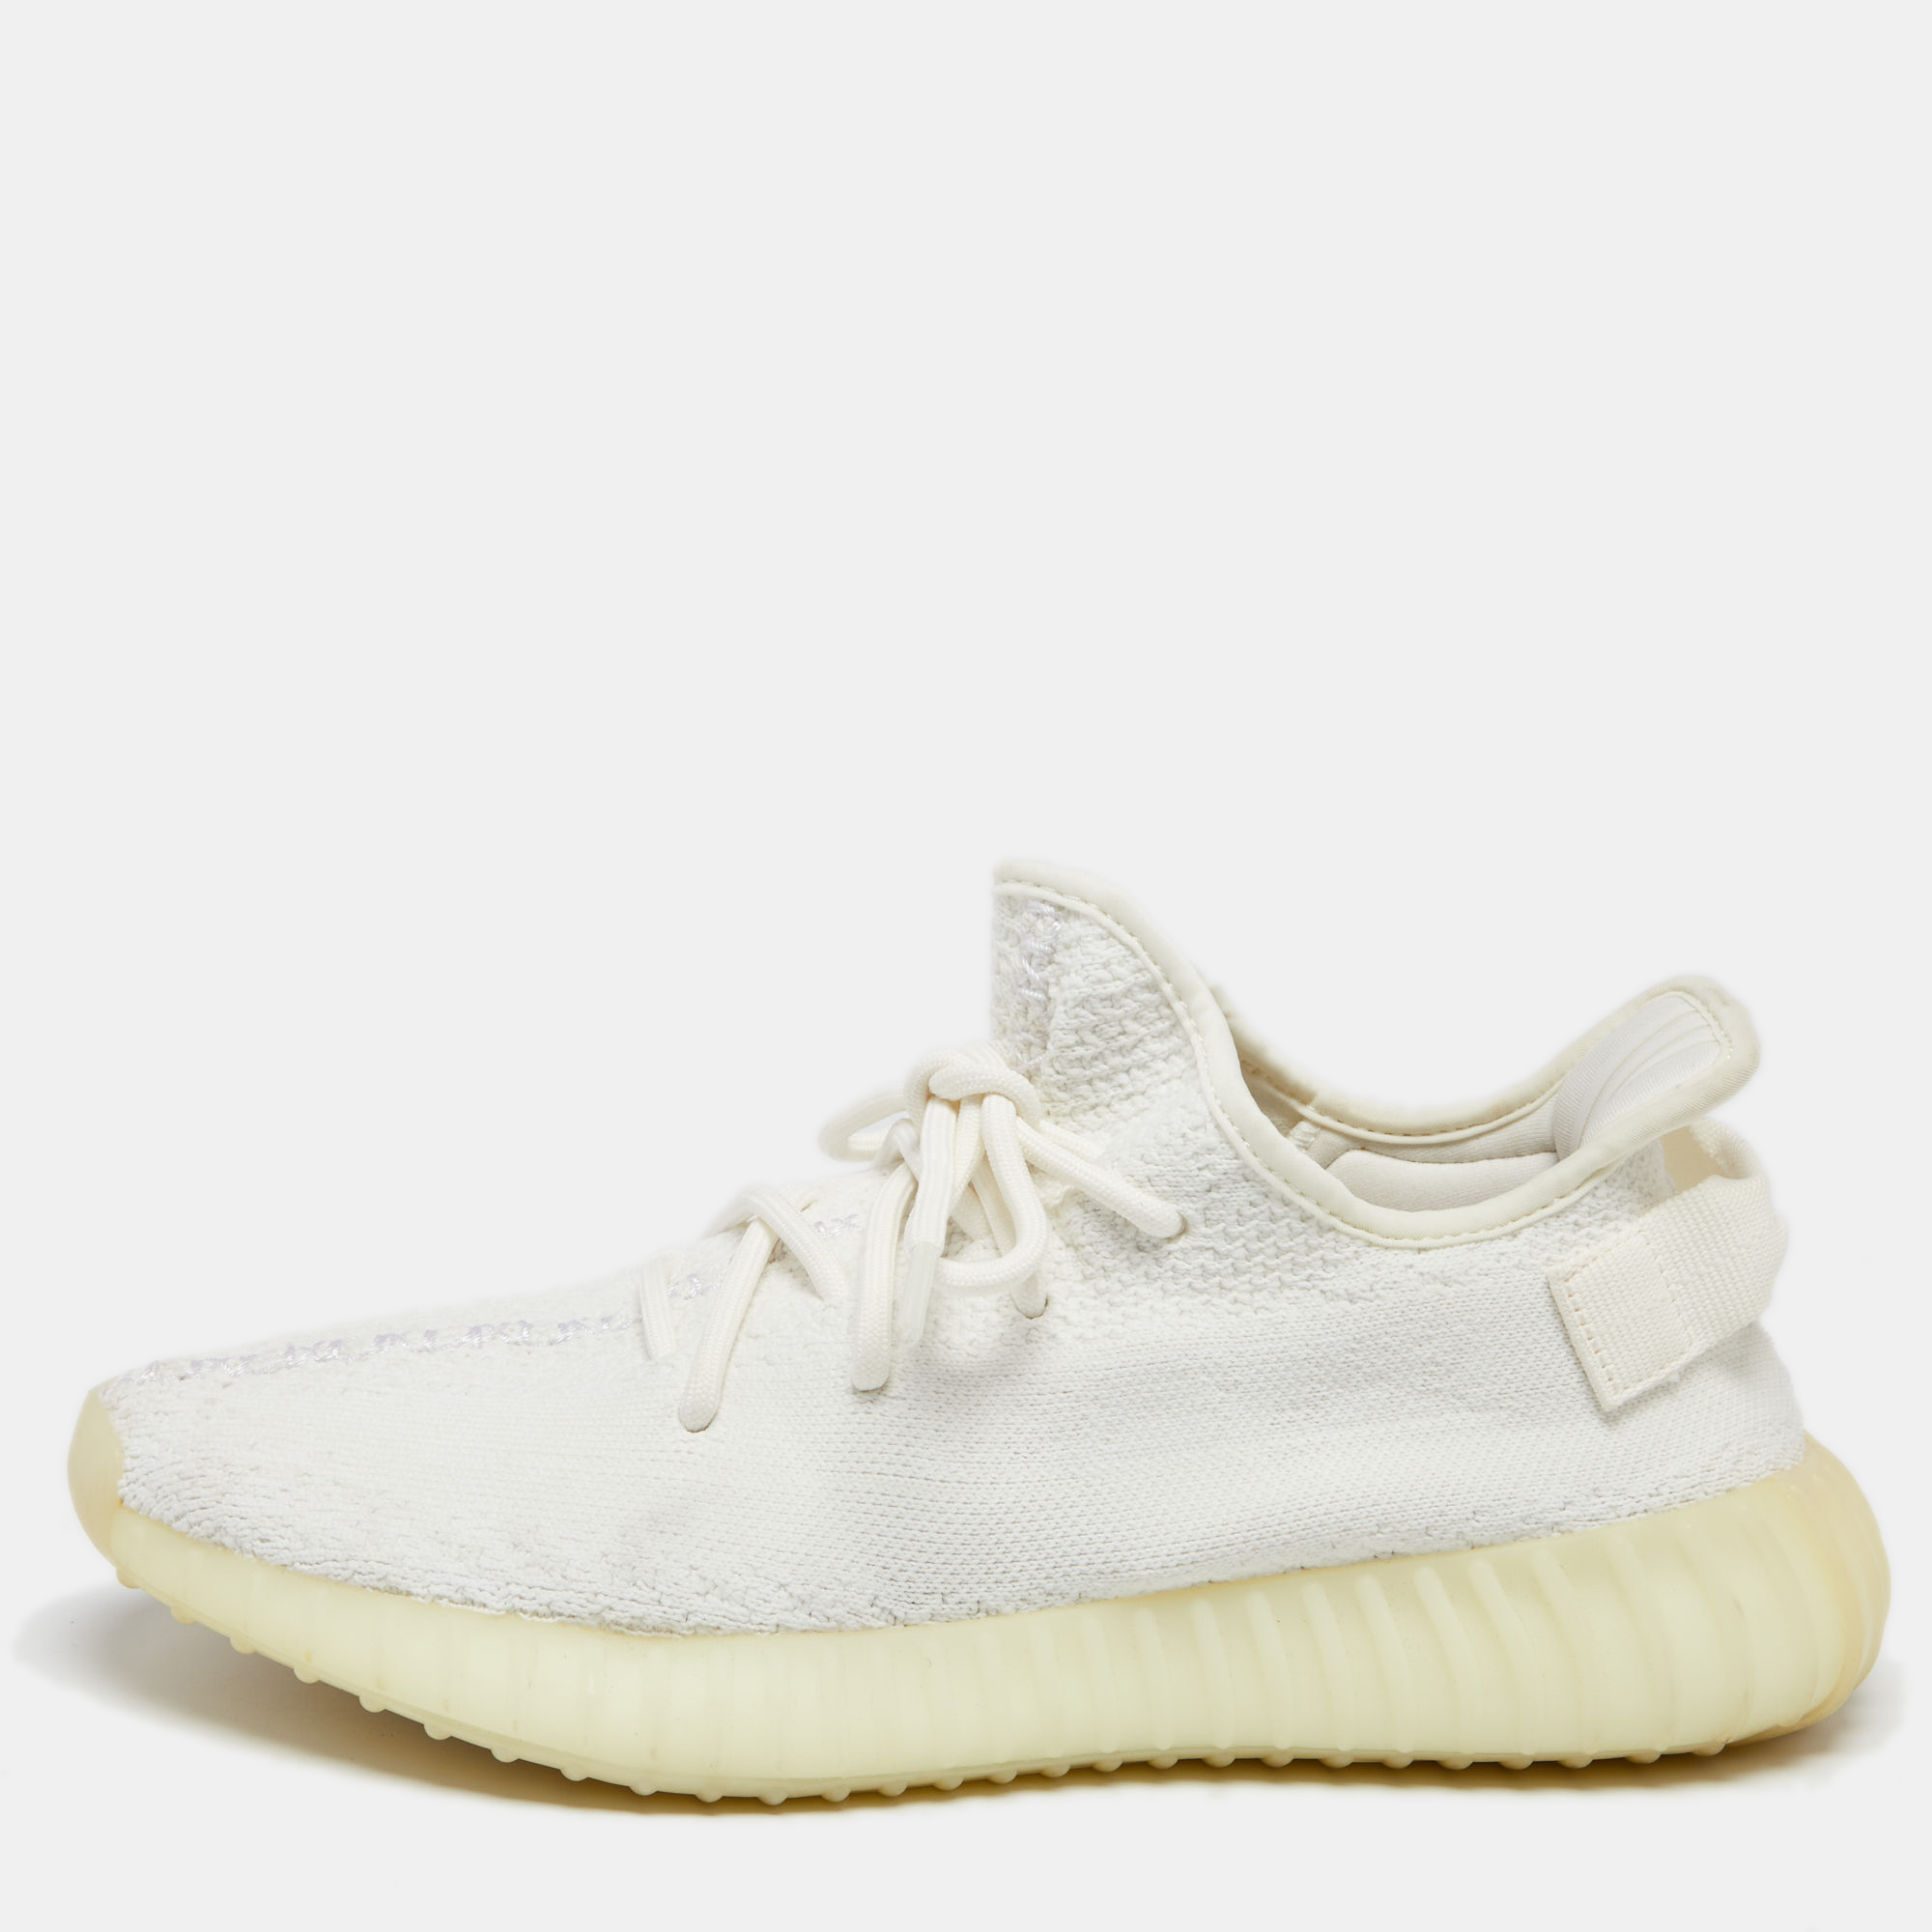 Coming from one of the most sought after collaborations Yeezy x Adidas these Boost 350 V2 Triple White sneakers are truly a classic pair to own They are created using cotton knit with a lace up fastening attached to their vamps. Their fabric lined insoles provide great cushioning to your feet.